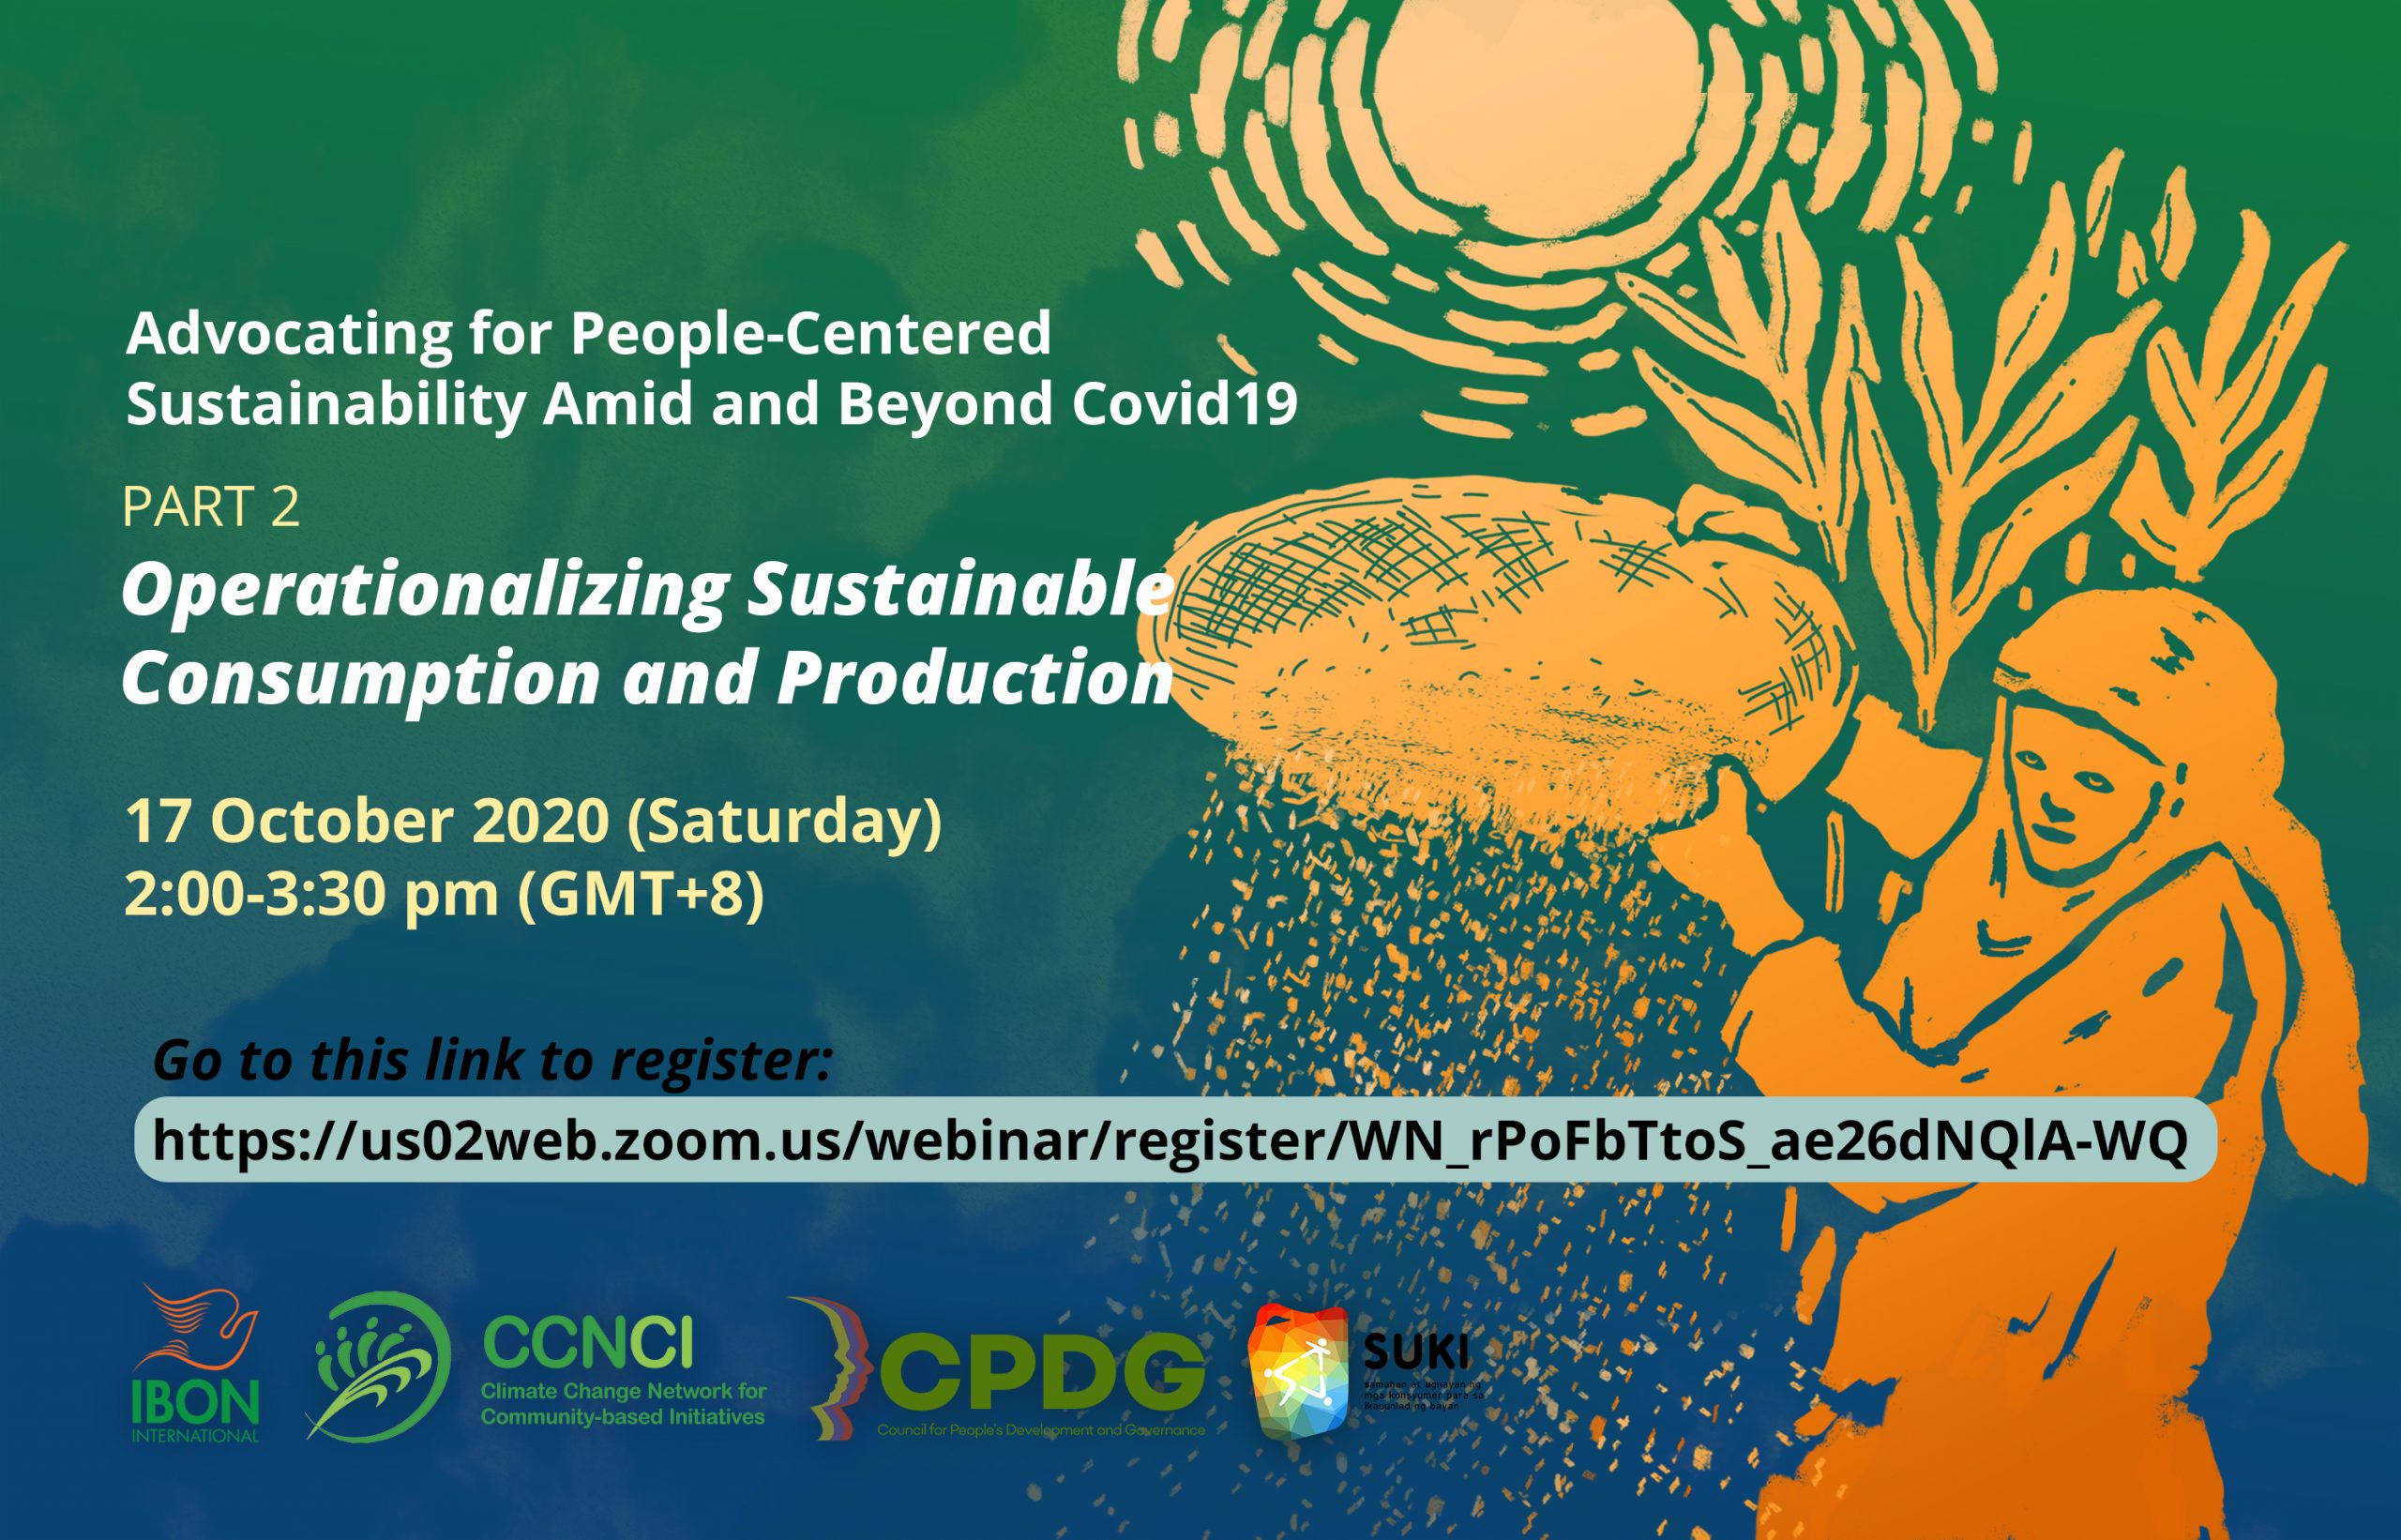 You are currently viewing WEBINAR SERIES / Advocating for People-Centered Sustainability Amid and Beyond COVID-19 (17, 9 October)